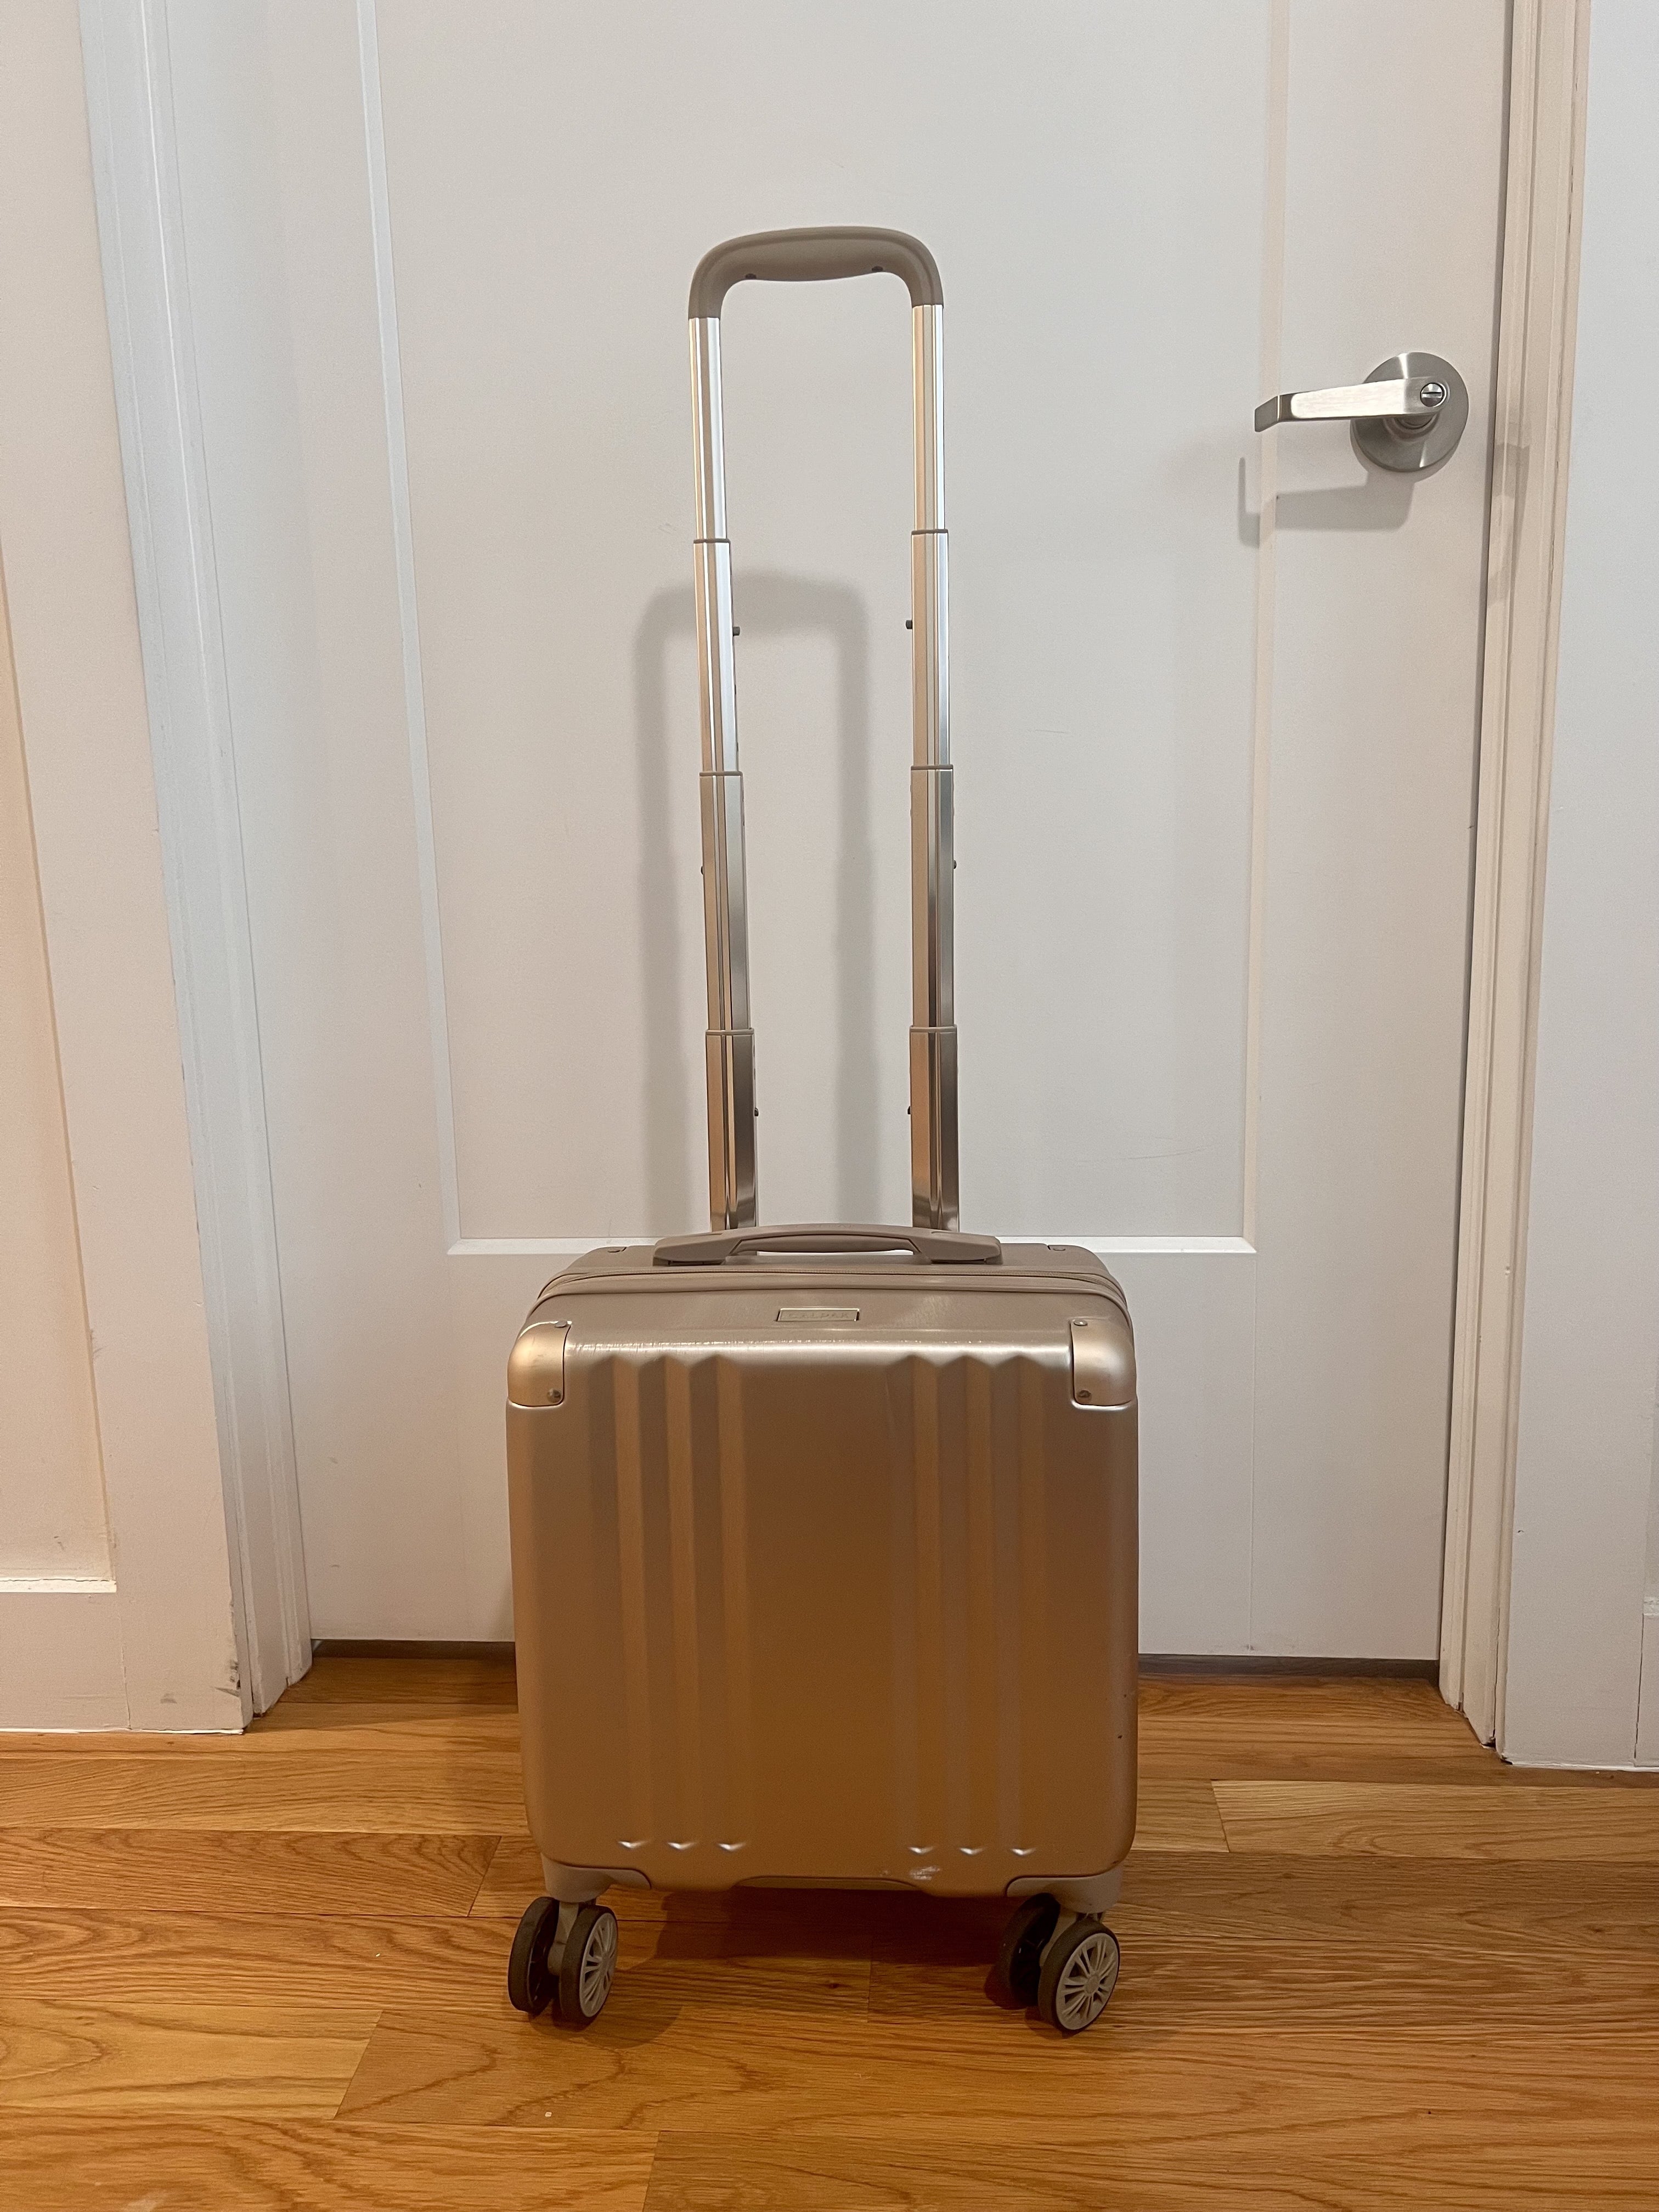 CALPAK CARRY ON 1 YEAR UPDATE, IS THIS STILL THE BEST SPIRIT AIRLINES CARRY  ON LUGGAGE?